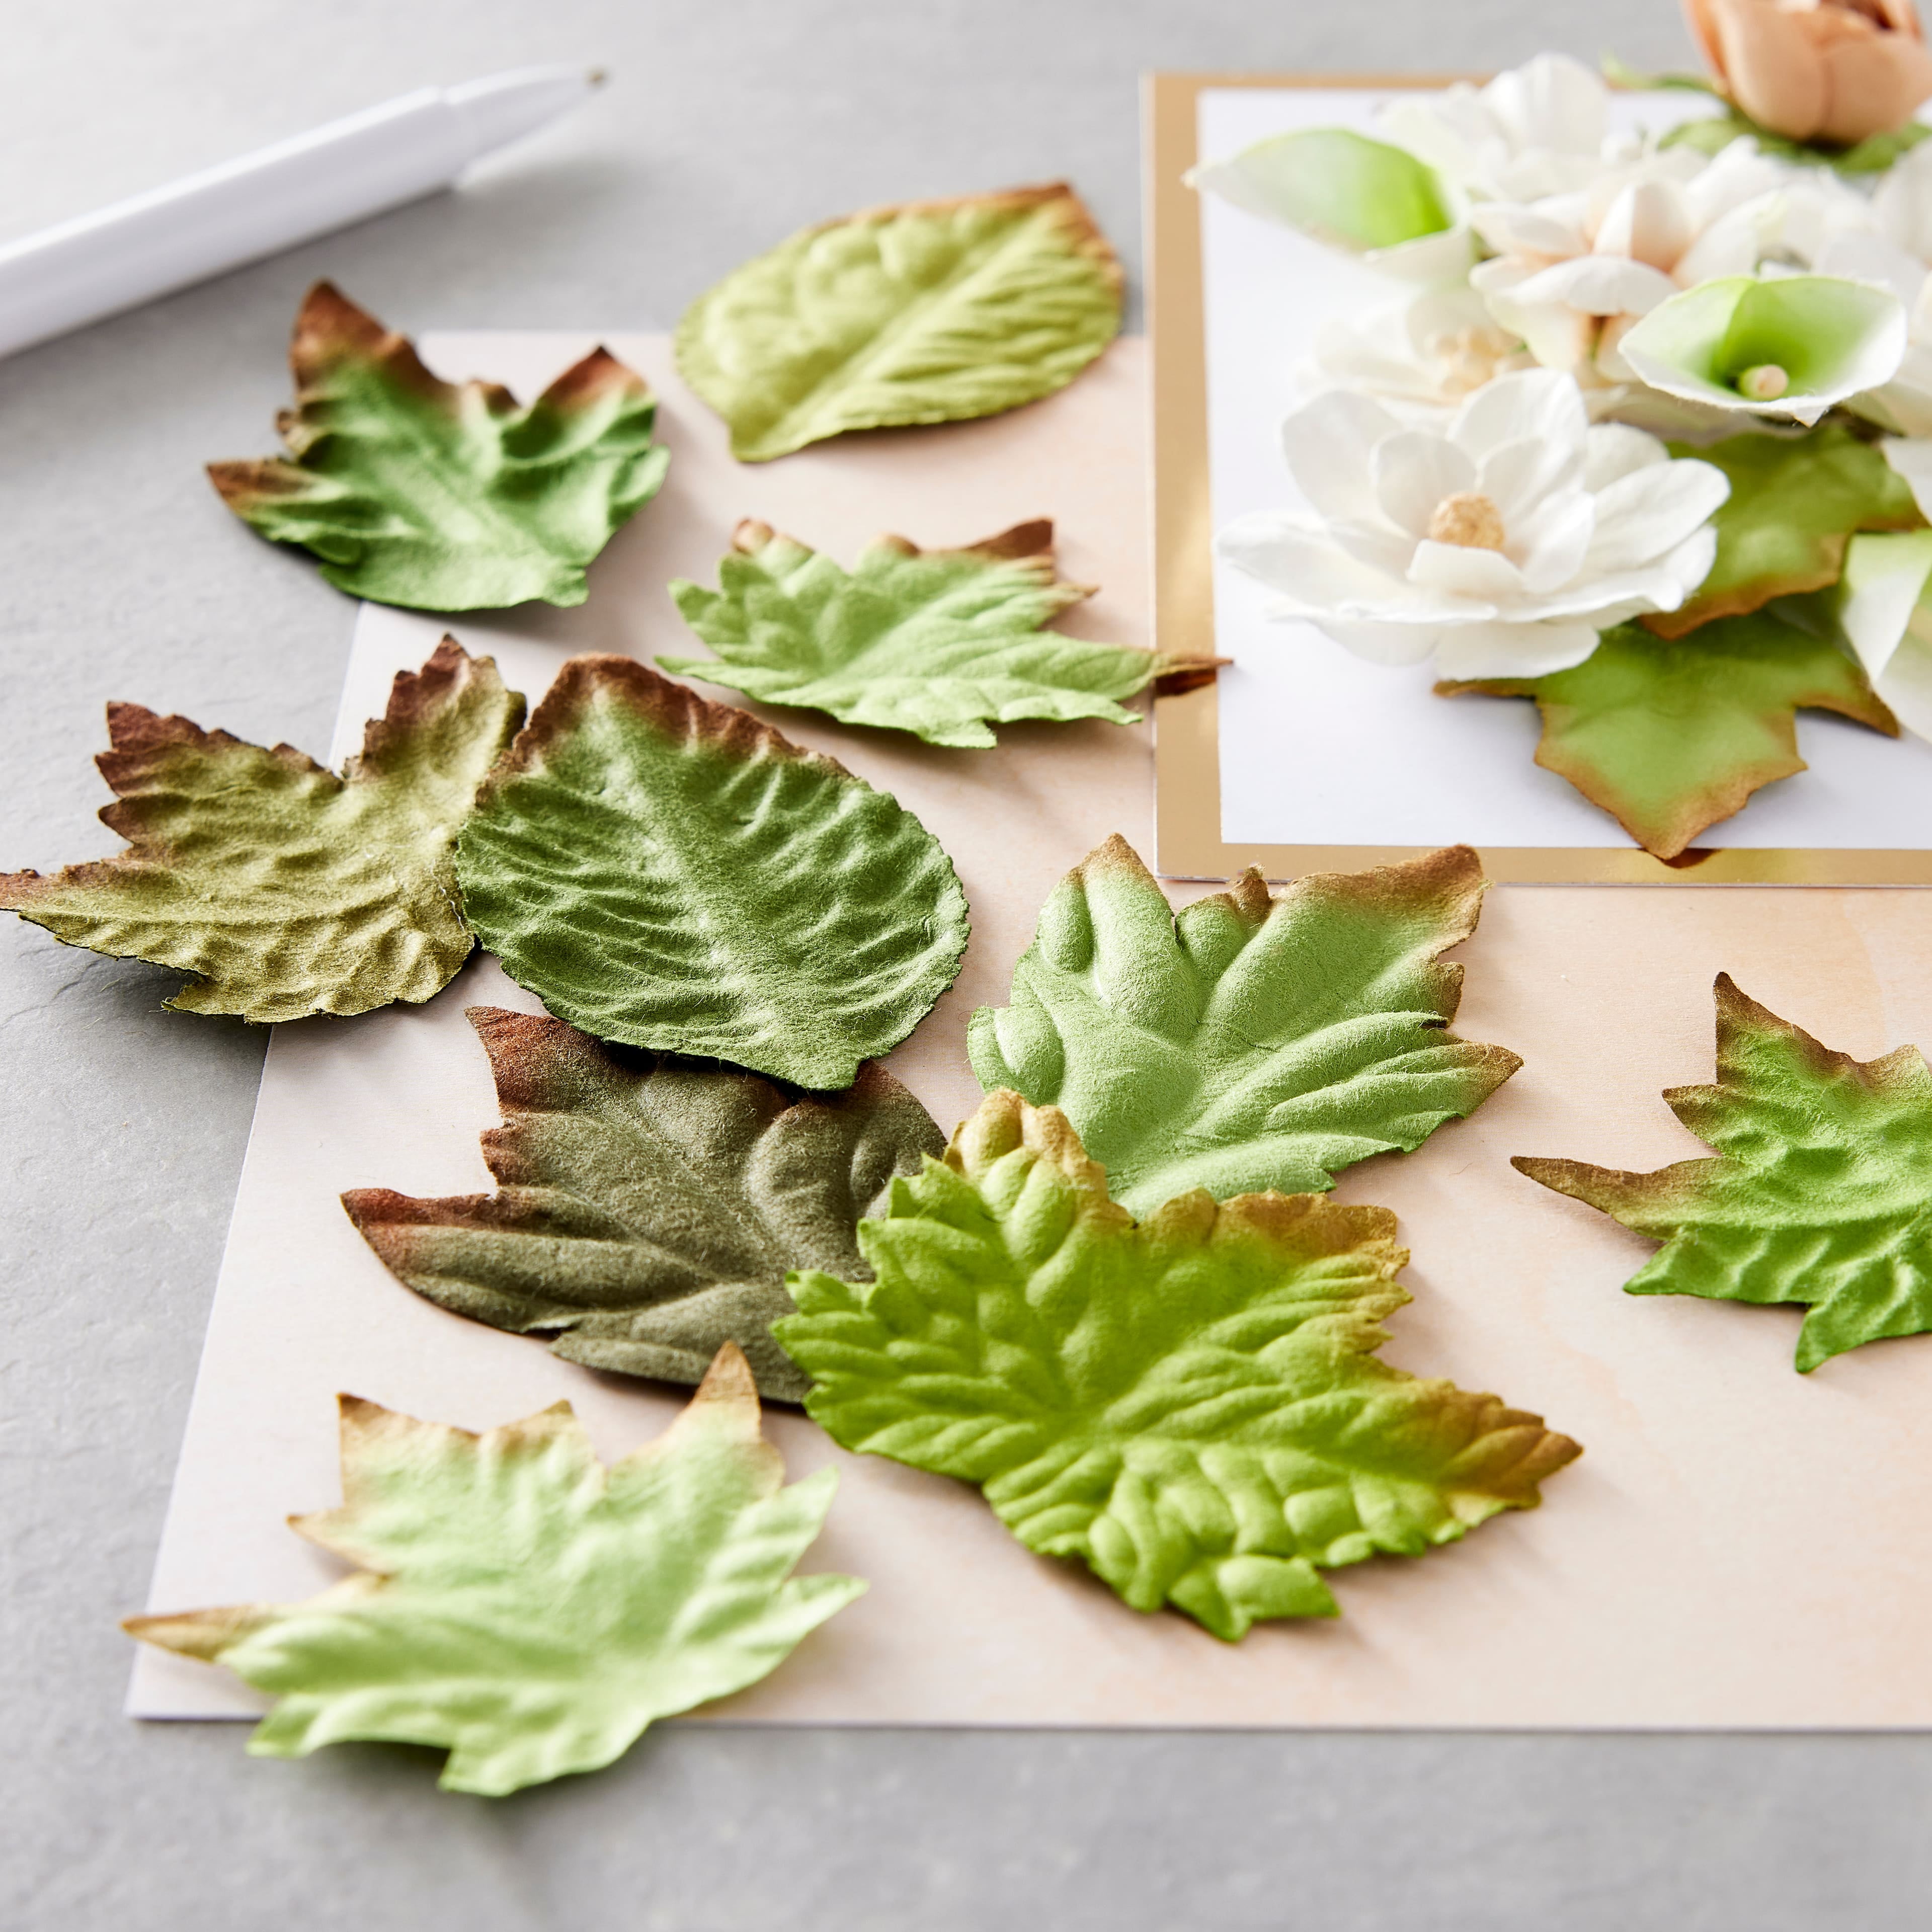 Fall Paper Leaf Embellishment Set by Recollections